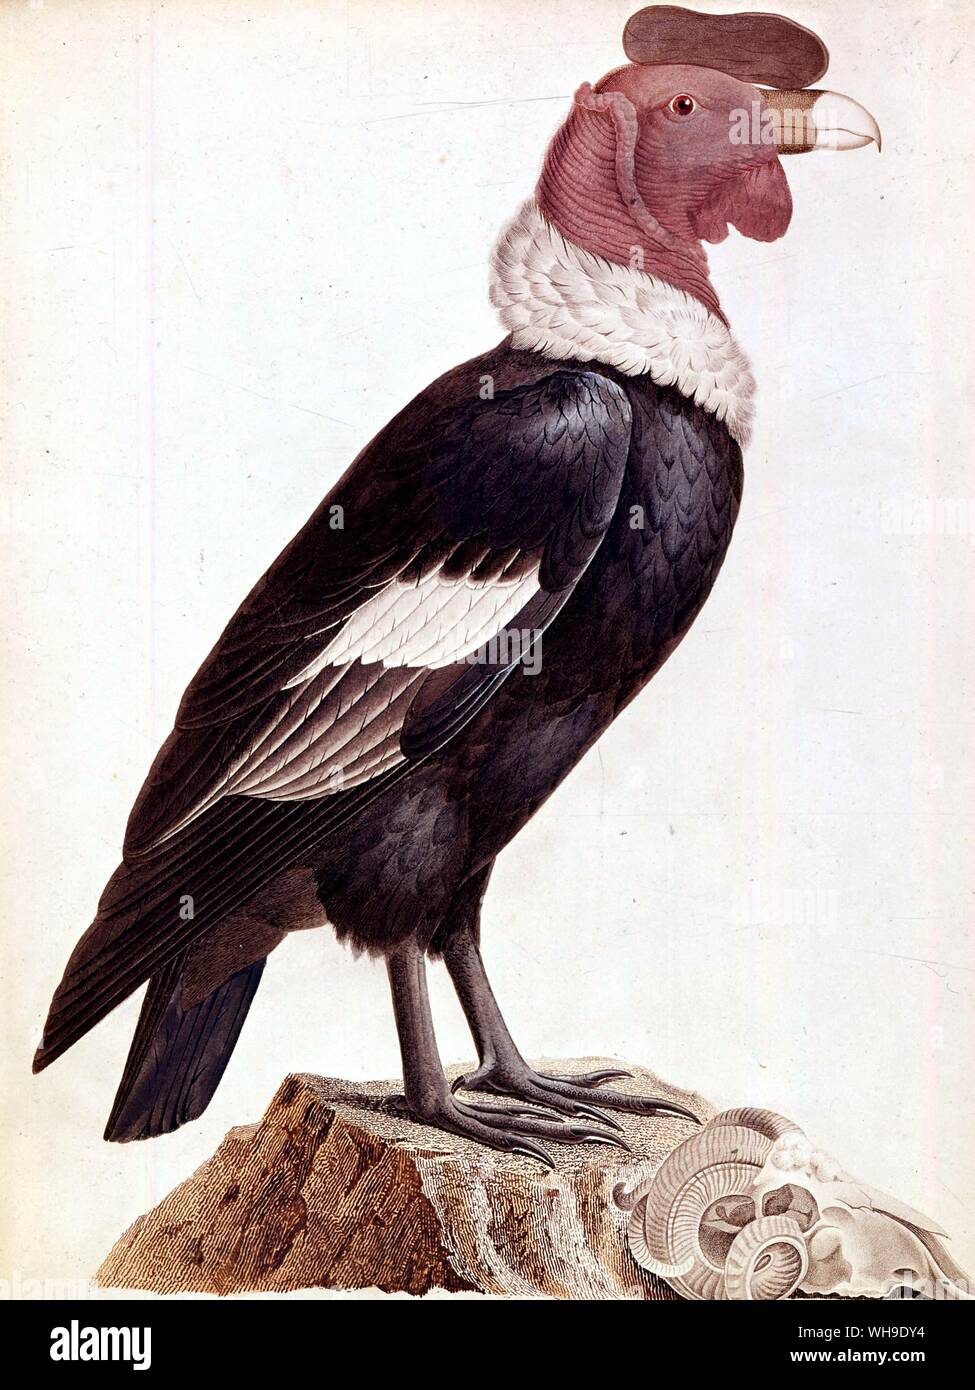 South American condor. From Racueil d'observations de zoologie by Humboldt and Bonpland, The Royal Geographical Society, London. Photo: Derrick Witty Stock Photo